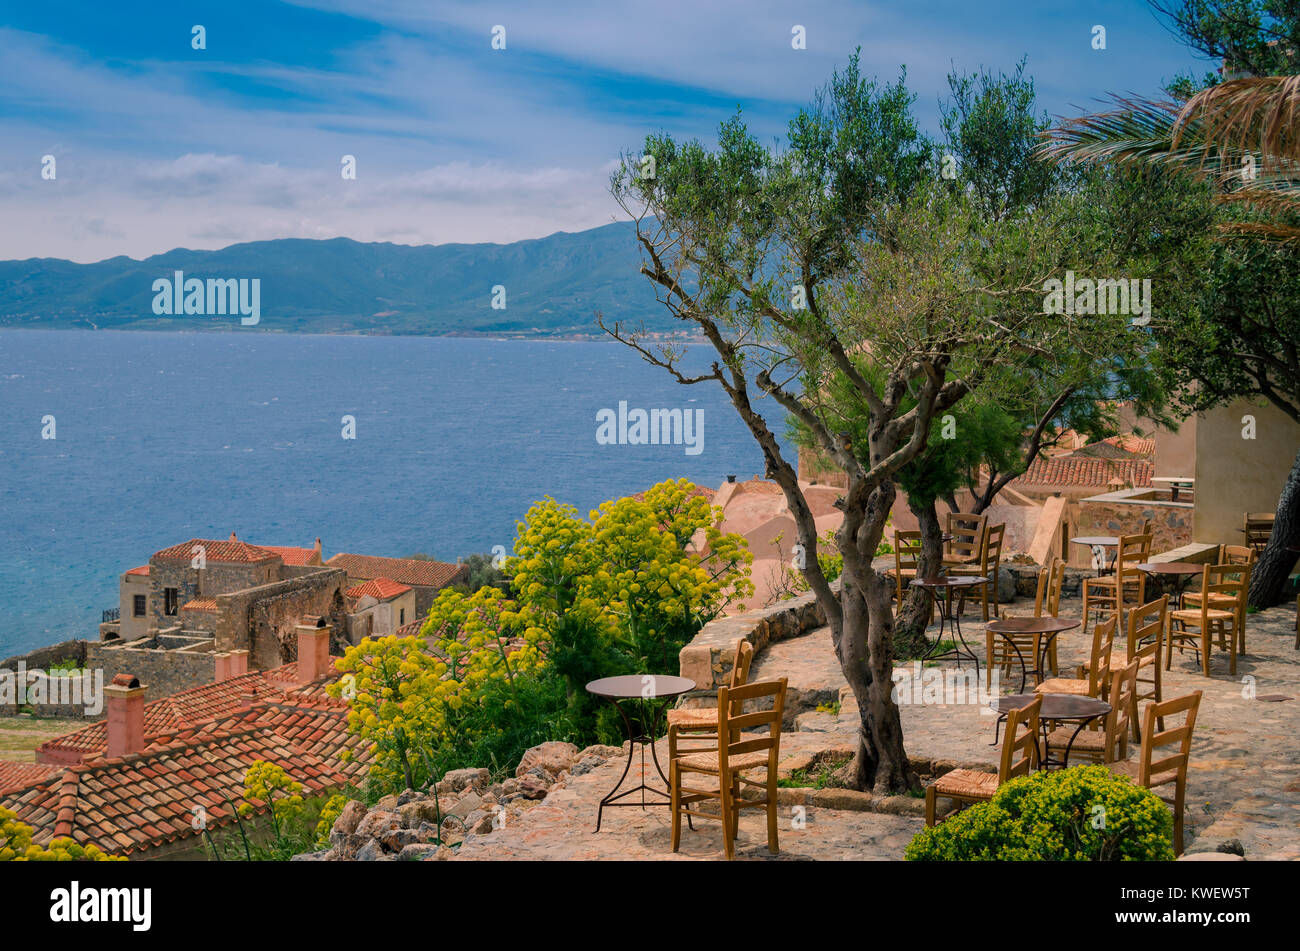 An olive tree surrounded by round iron tables and wooden chairs, typical for traditional greek cafes, overlooking the roofs of houses and the sea Stock Photo